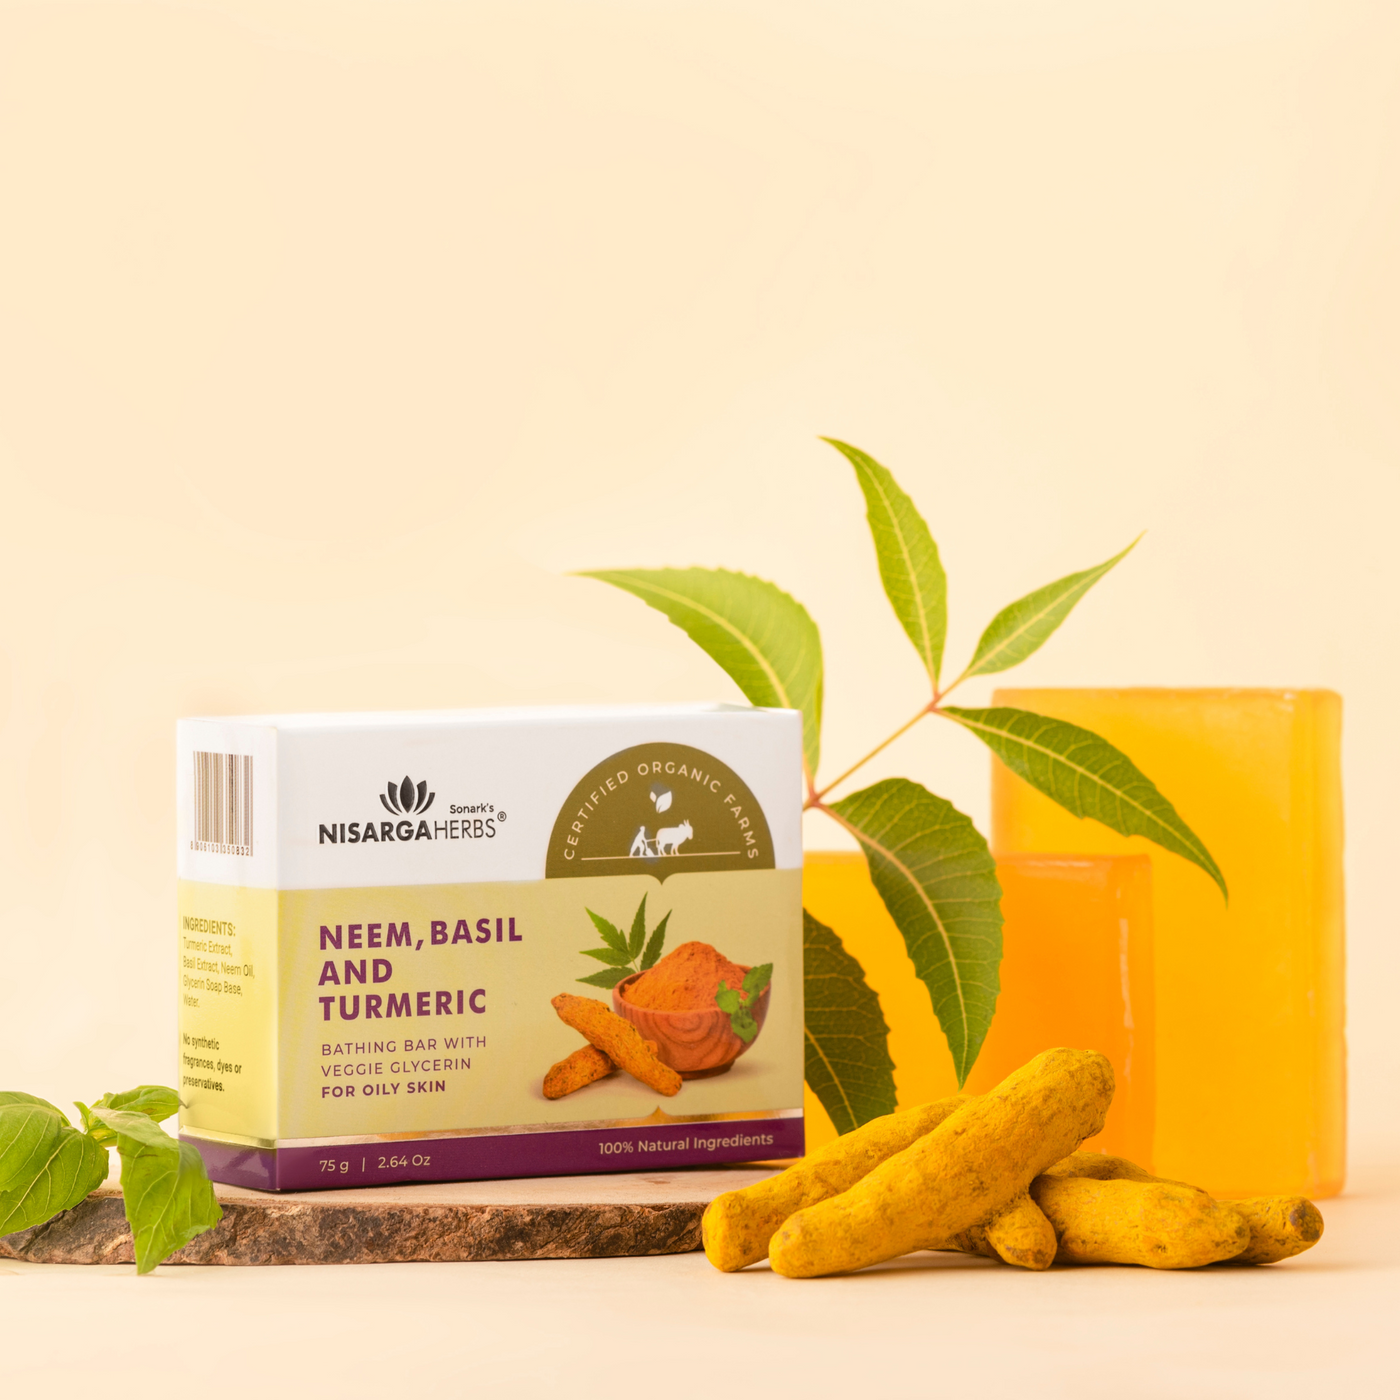 Neem, Basil & Turmeric Soap - Deep cleansing action for oily skin